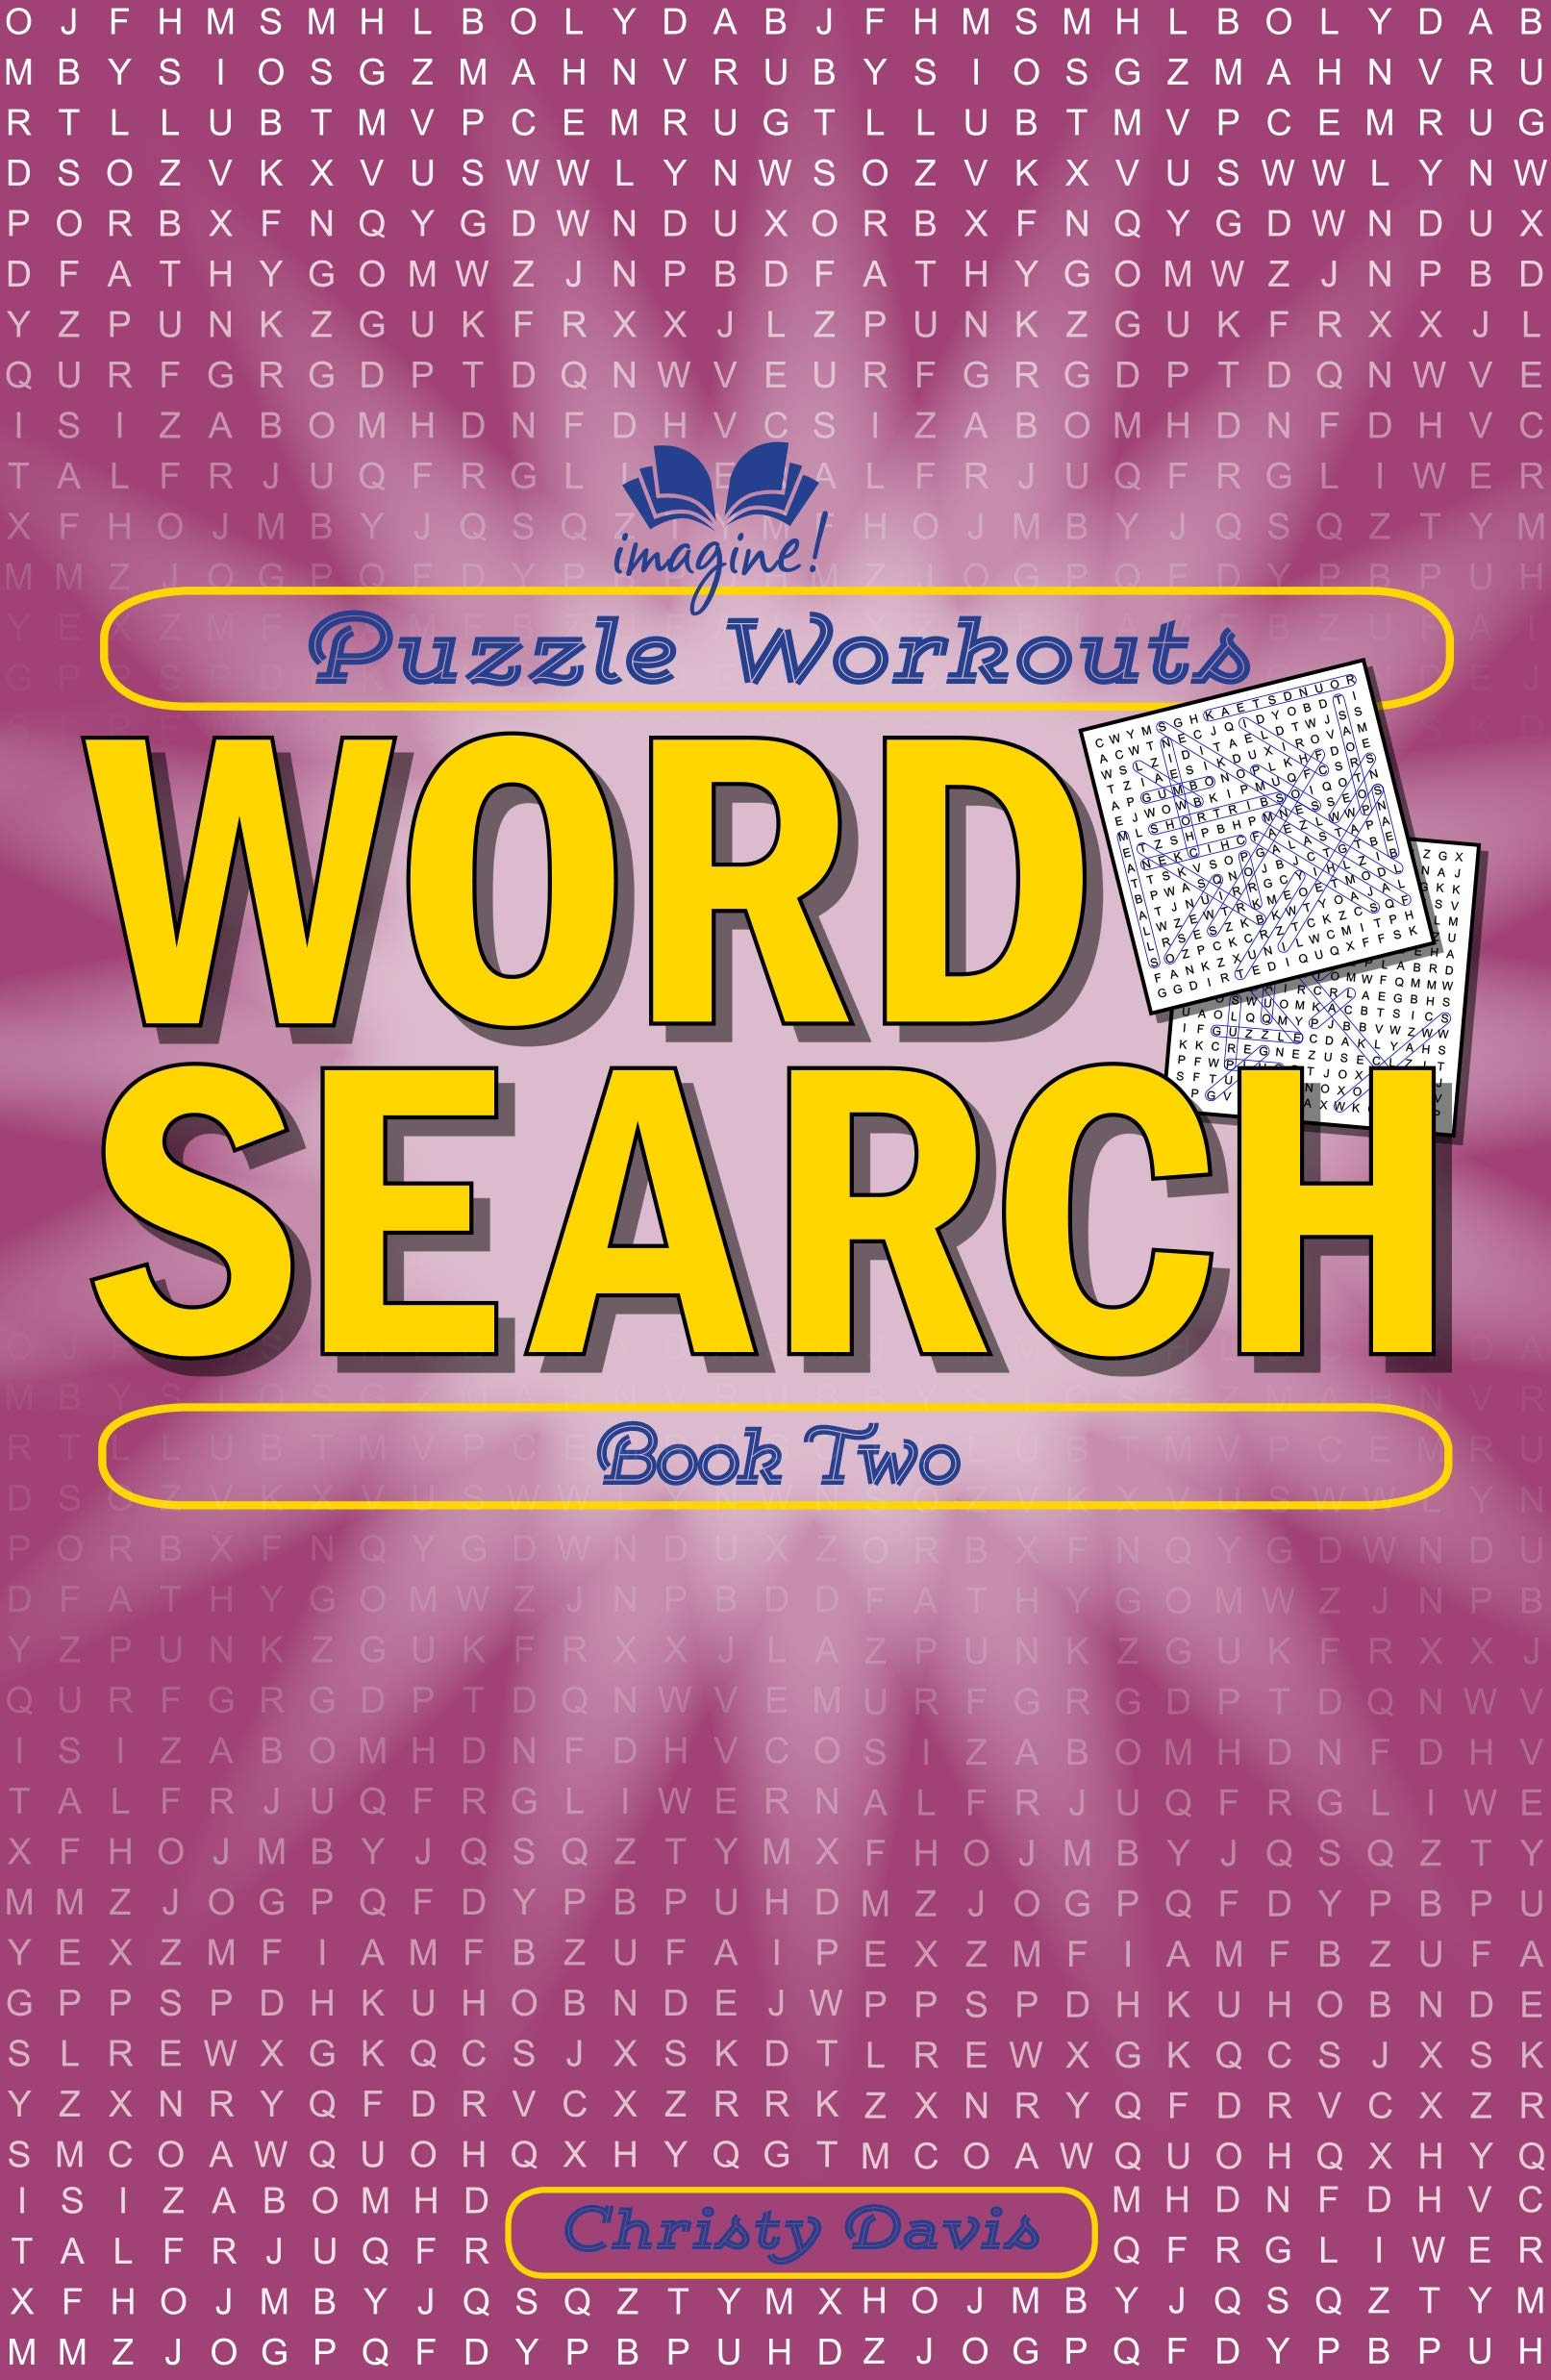 Sách - Puzzle Workouts: Word Search (Book Two) - Phương Nam Book